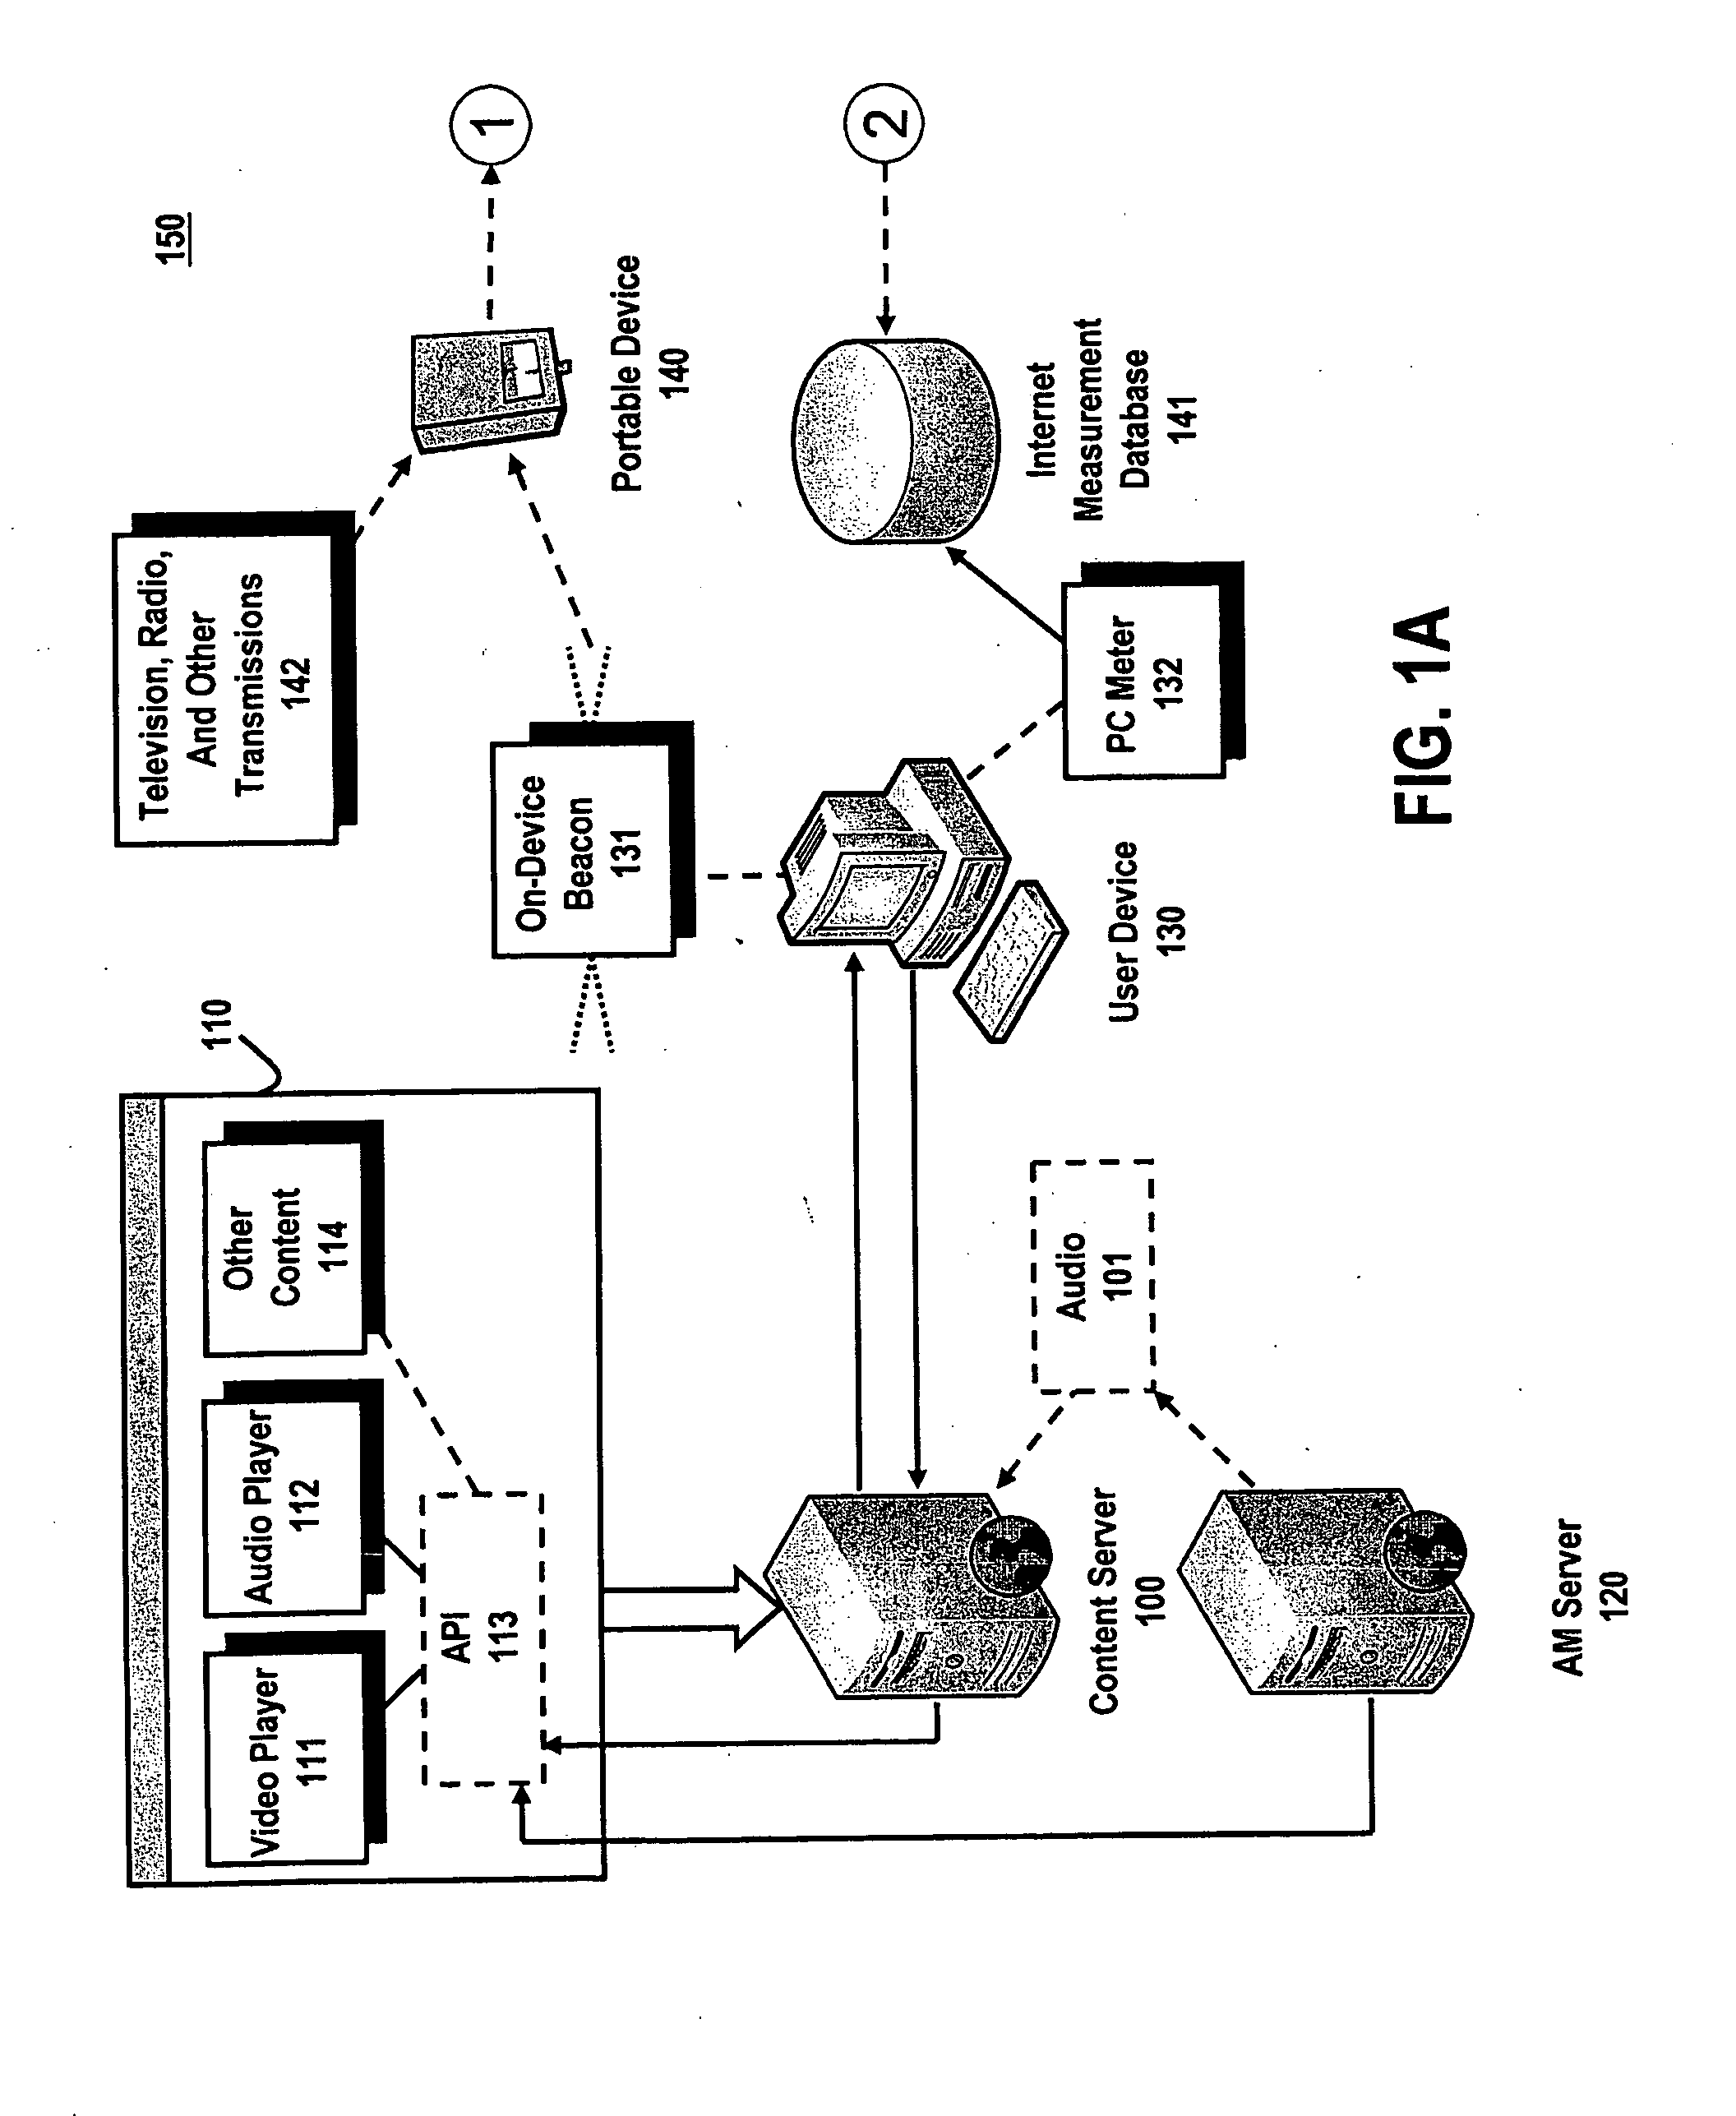 System and method for utilizing supplemental audio beaconing in audience measurement